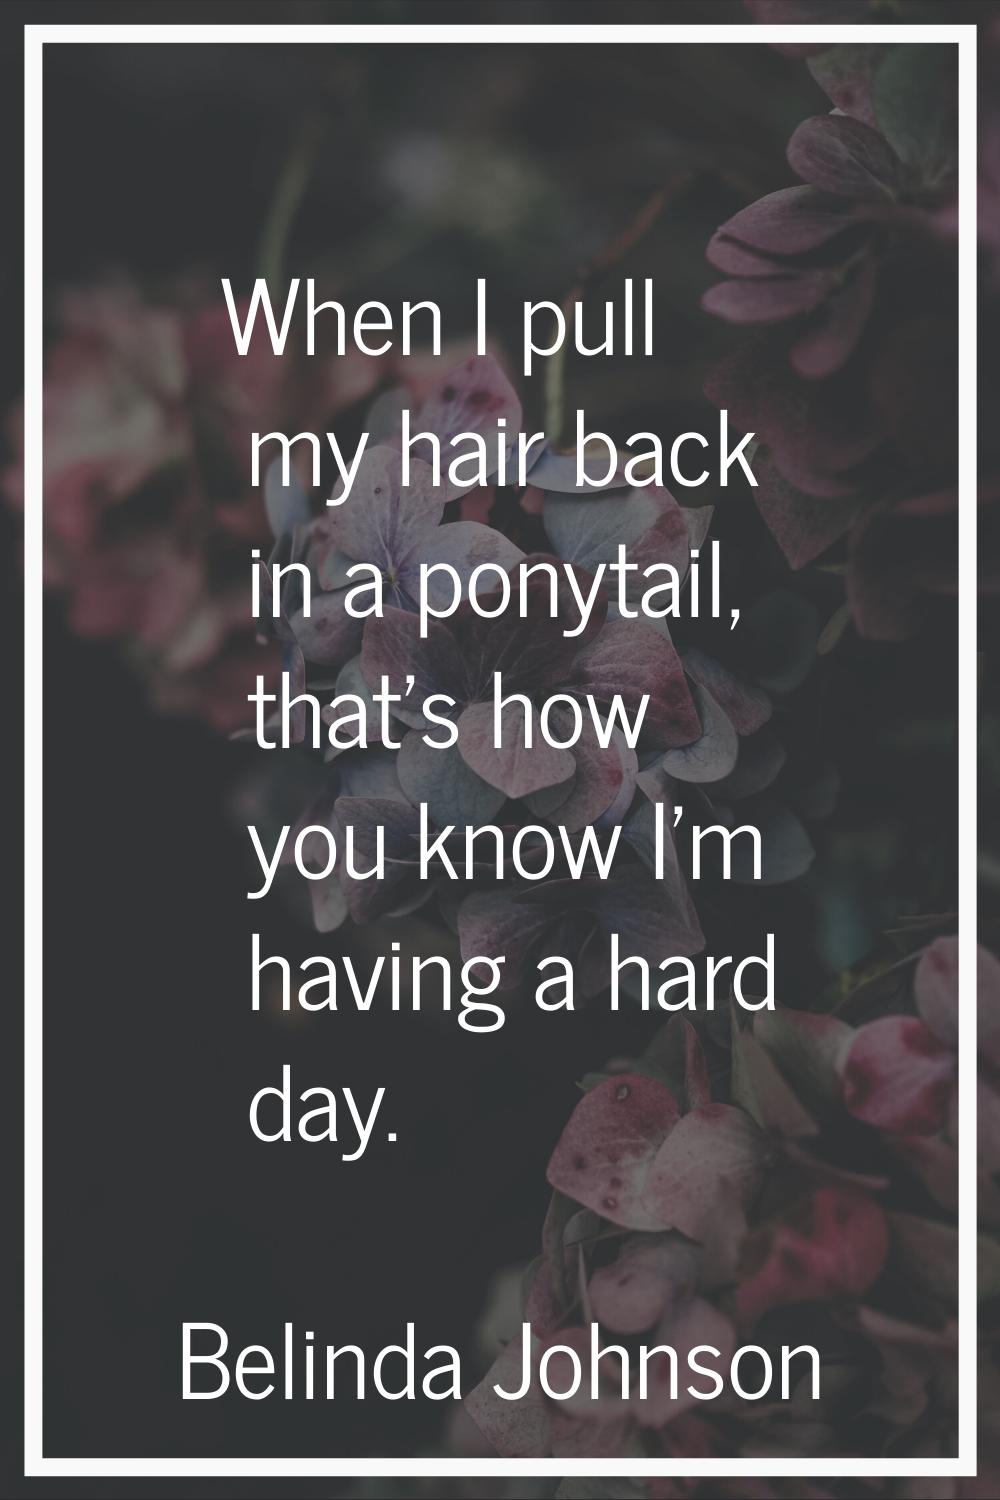 When I pull my hair back in a ponytail, that's how you know I'm having a hard day.